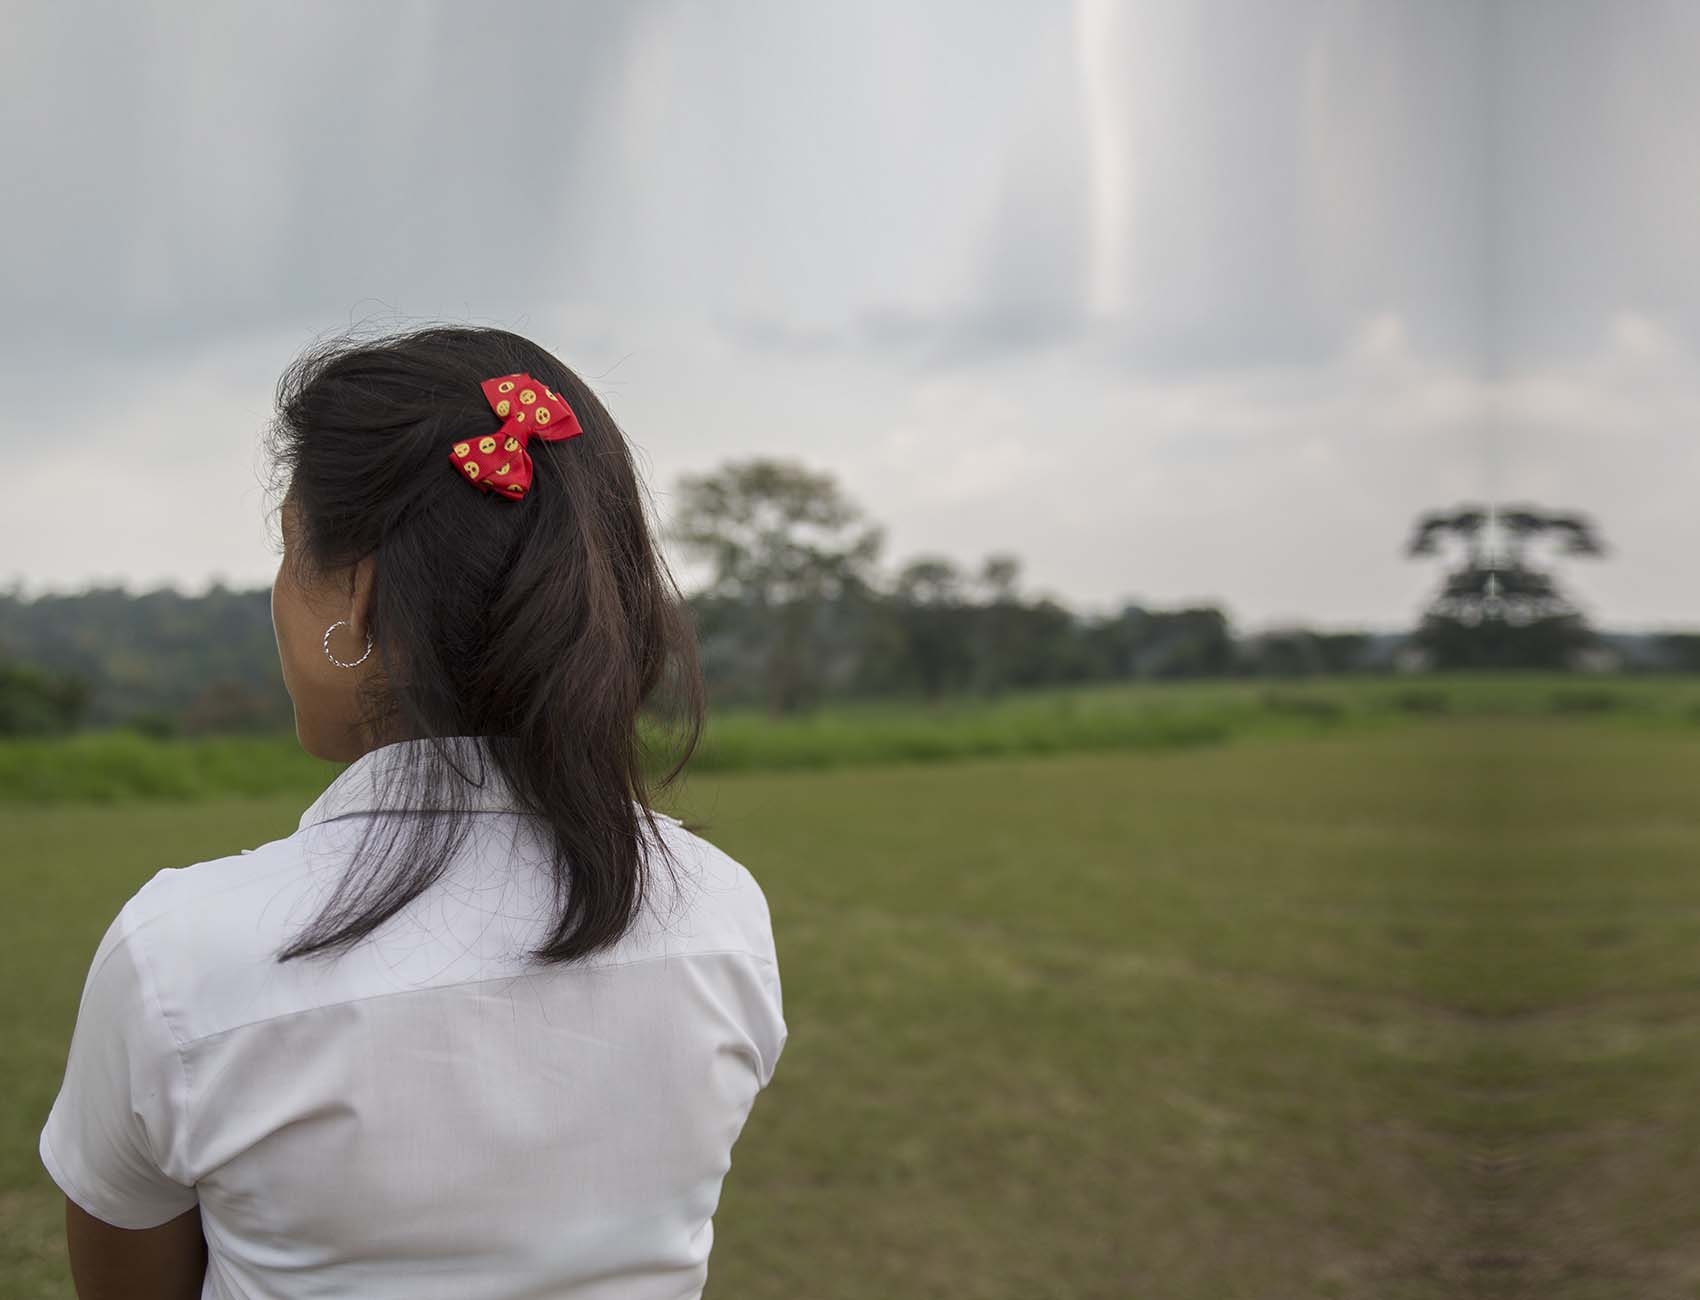 A 14-year old girl stands with her arms cross while looking out over a grassy field in El Salvador. 